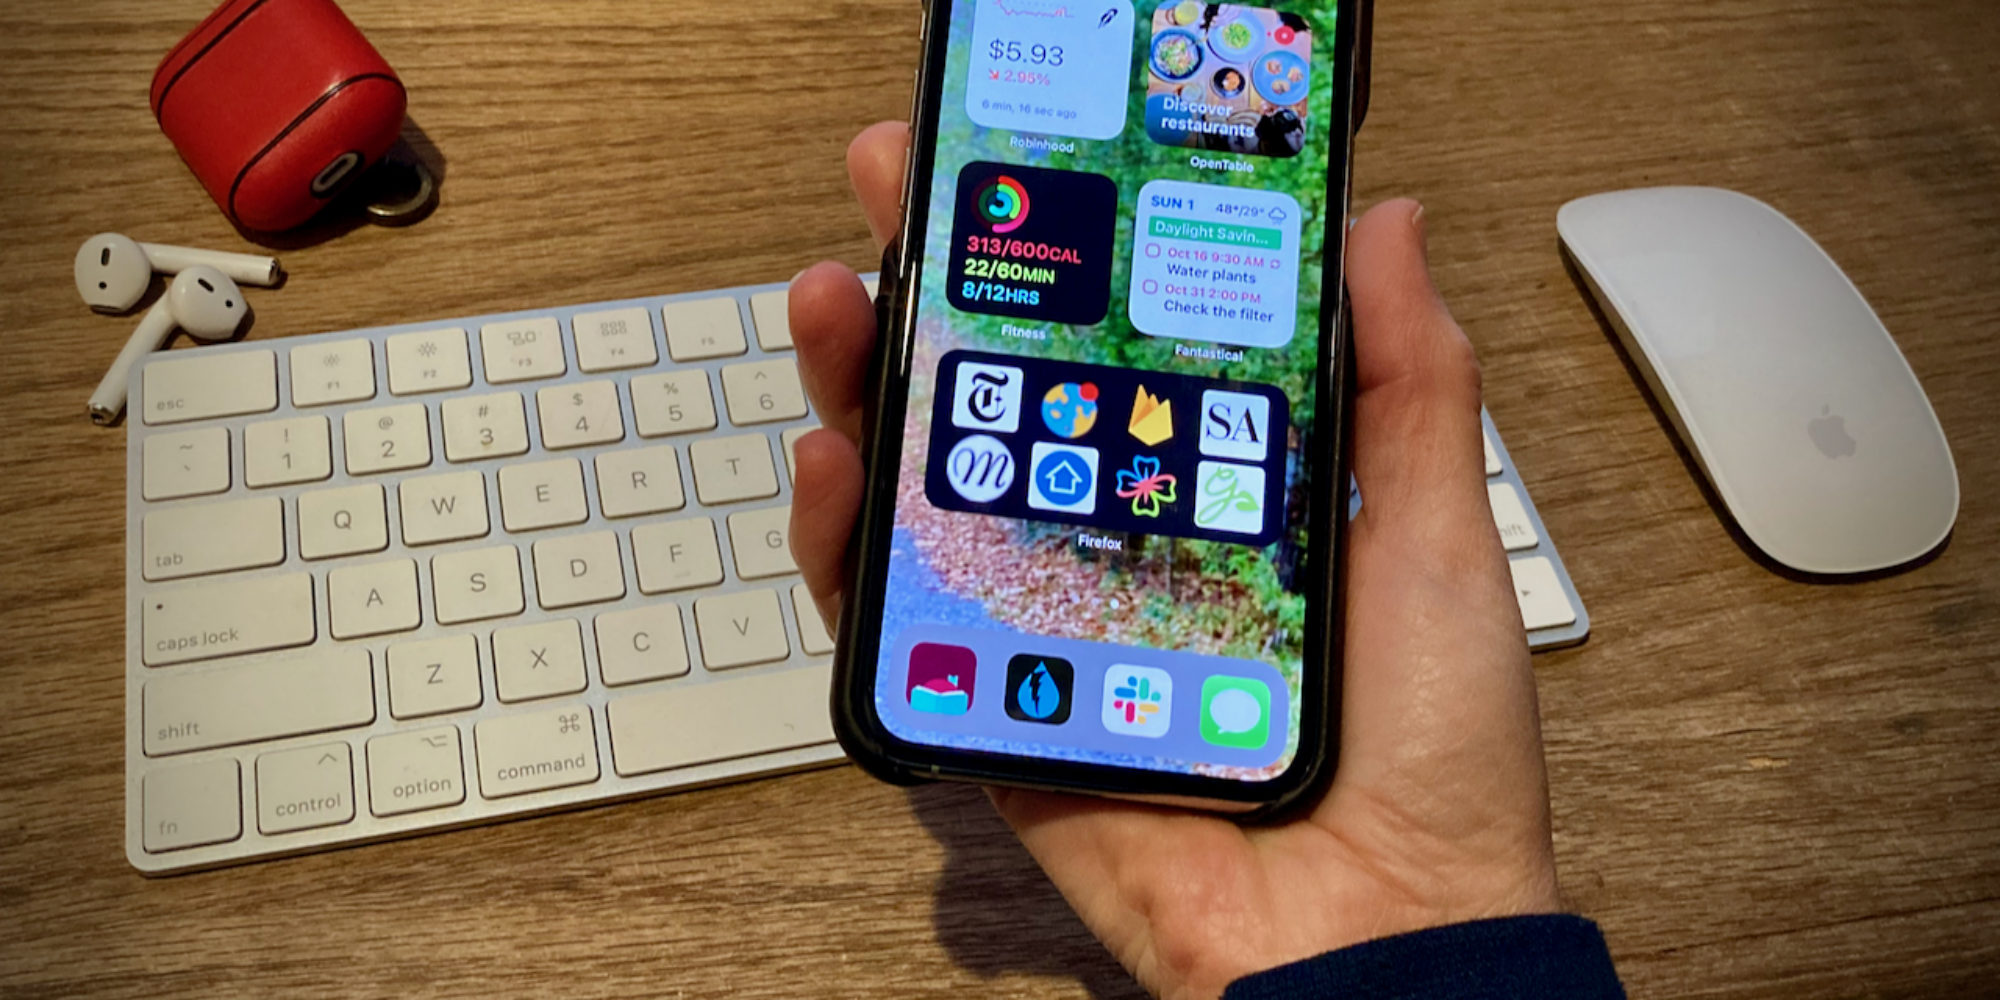 Home Screen Widgets Take Center Stage in iOS 14